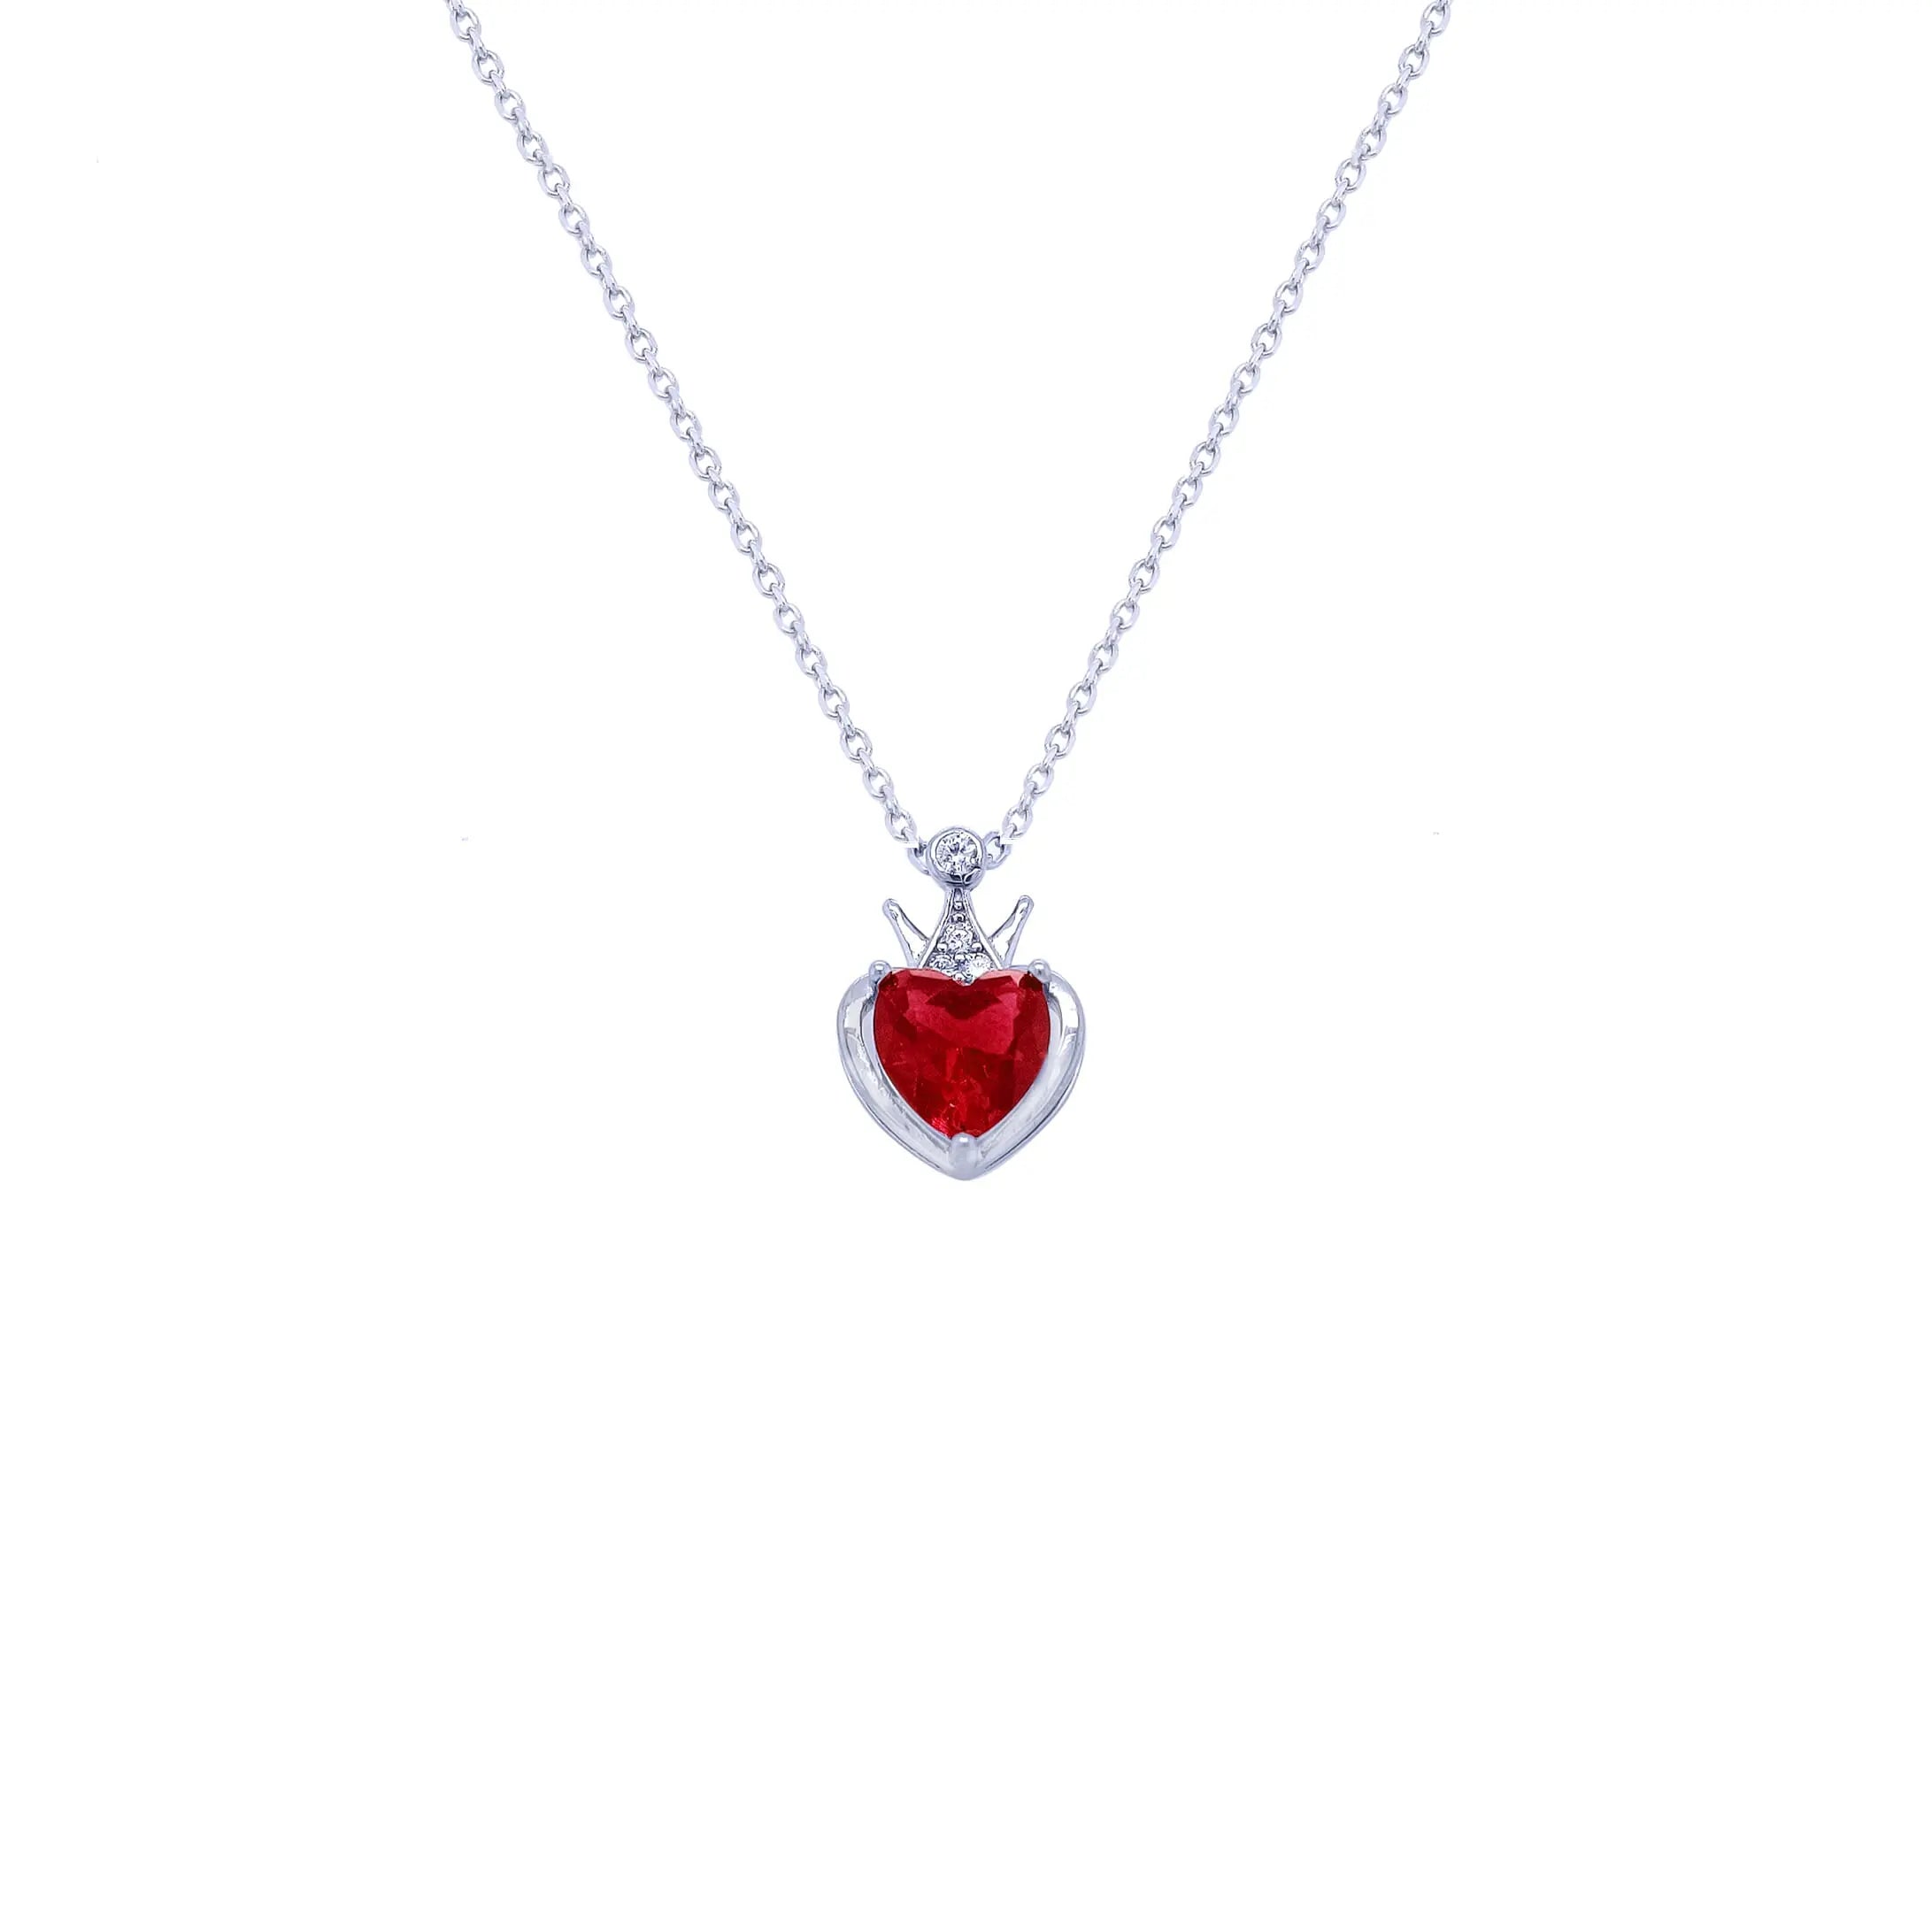 Asfour Sterling Silver 925 Chain With Red Heart Design Pendant